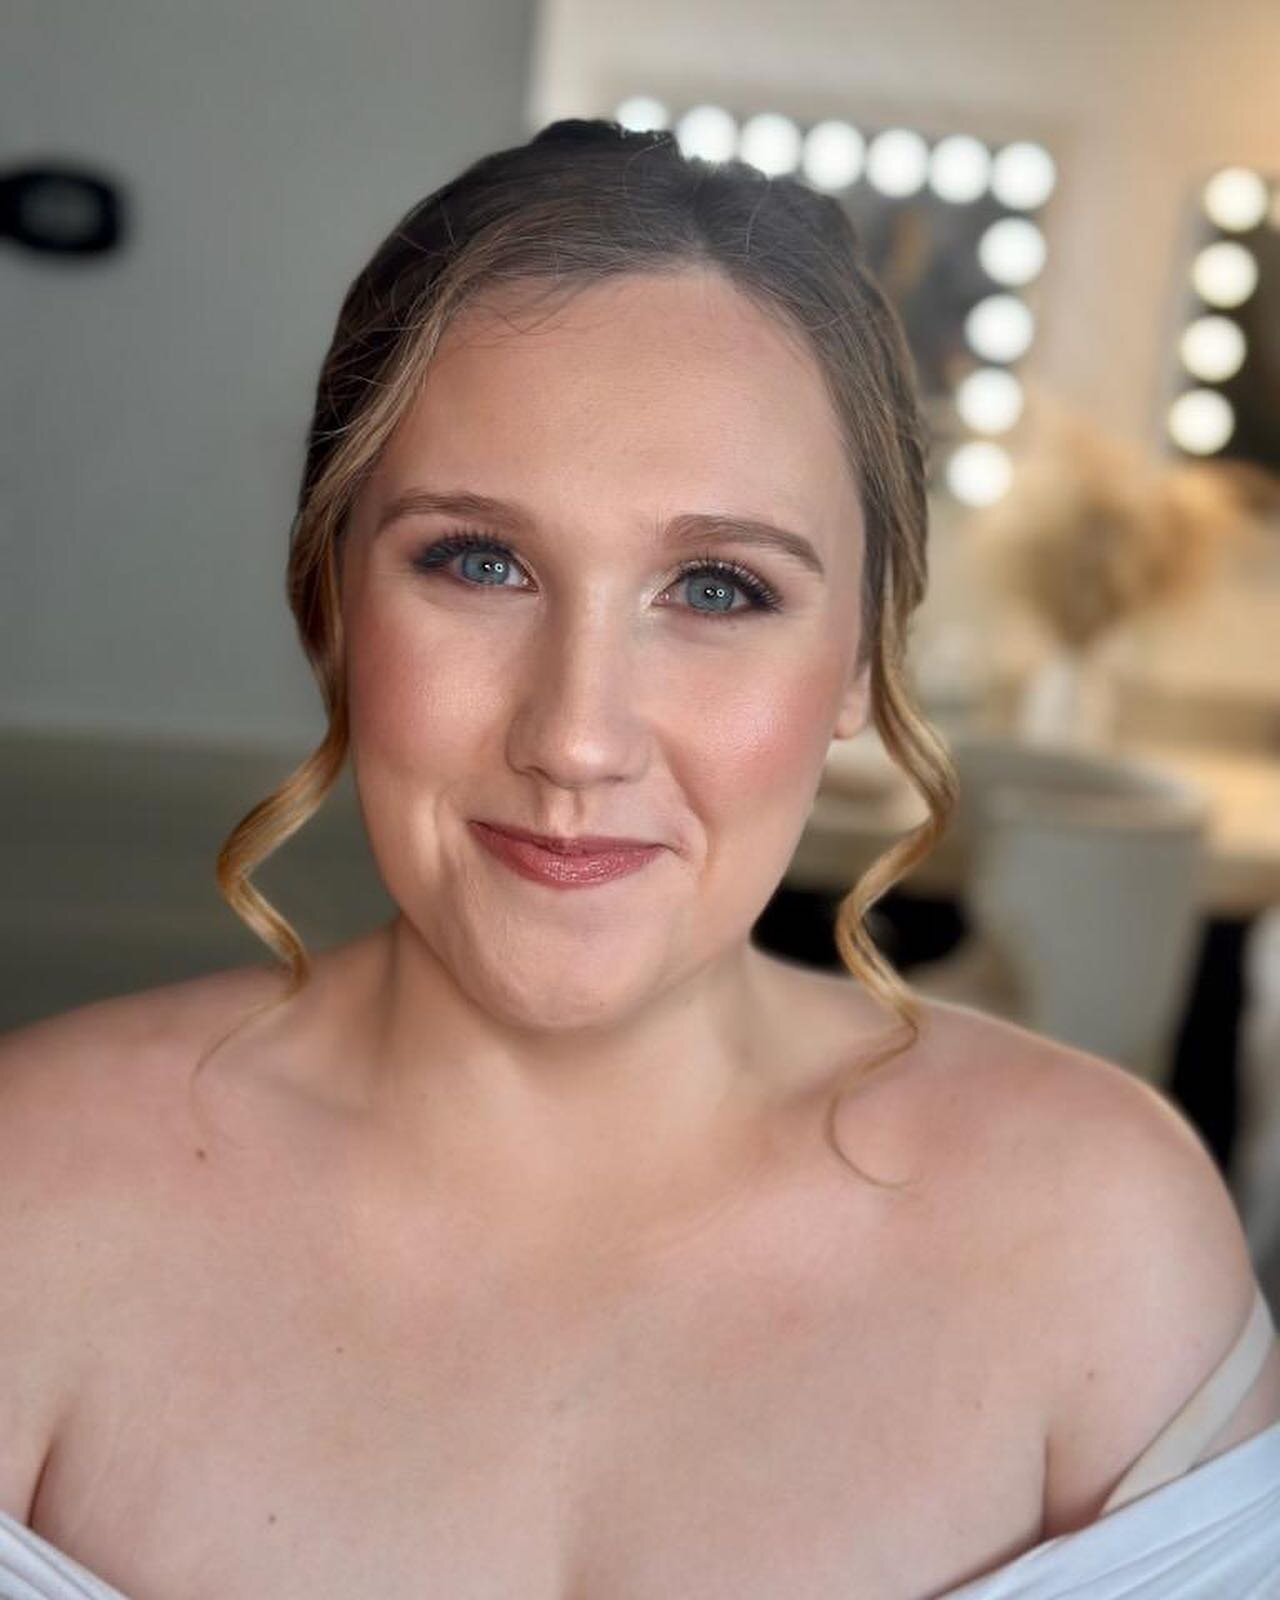 This beautiful bride had pink tones on her eyes with glowy airbrush foundation, individual lashes, and a nude-pink lip 👄✨ Makeup by @glamourbycolleen